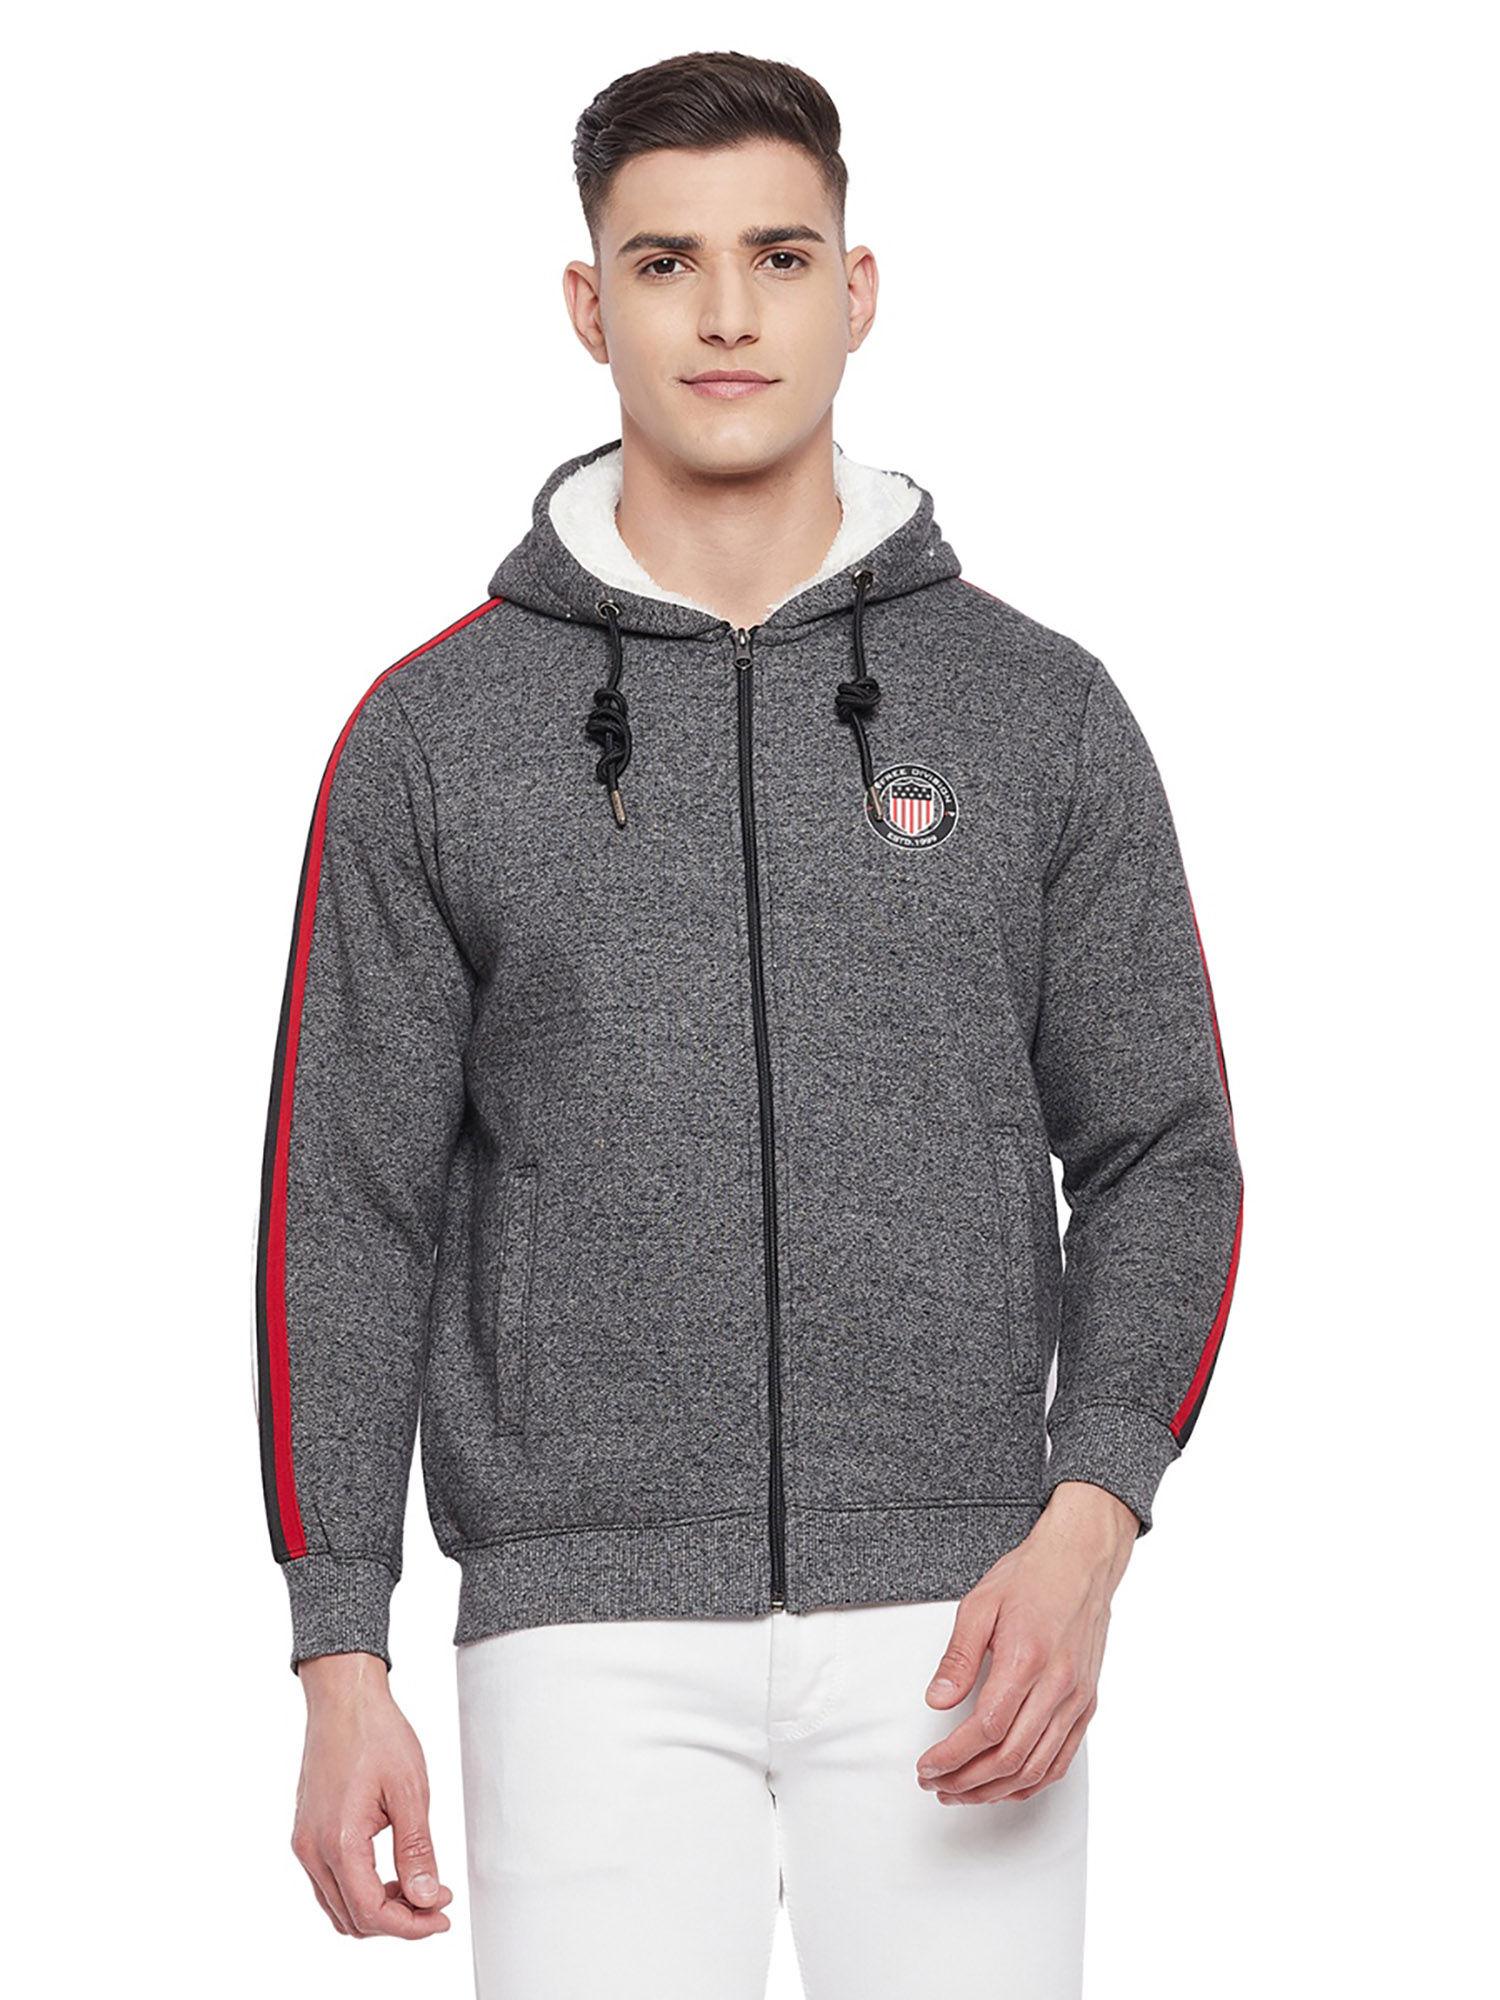 mens full zipper hoodie with chest patch sweatshirt